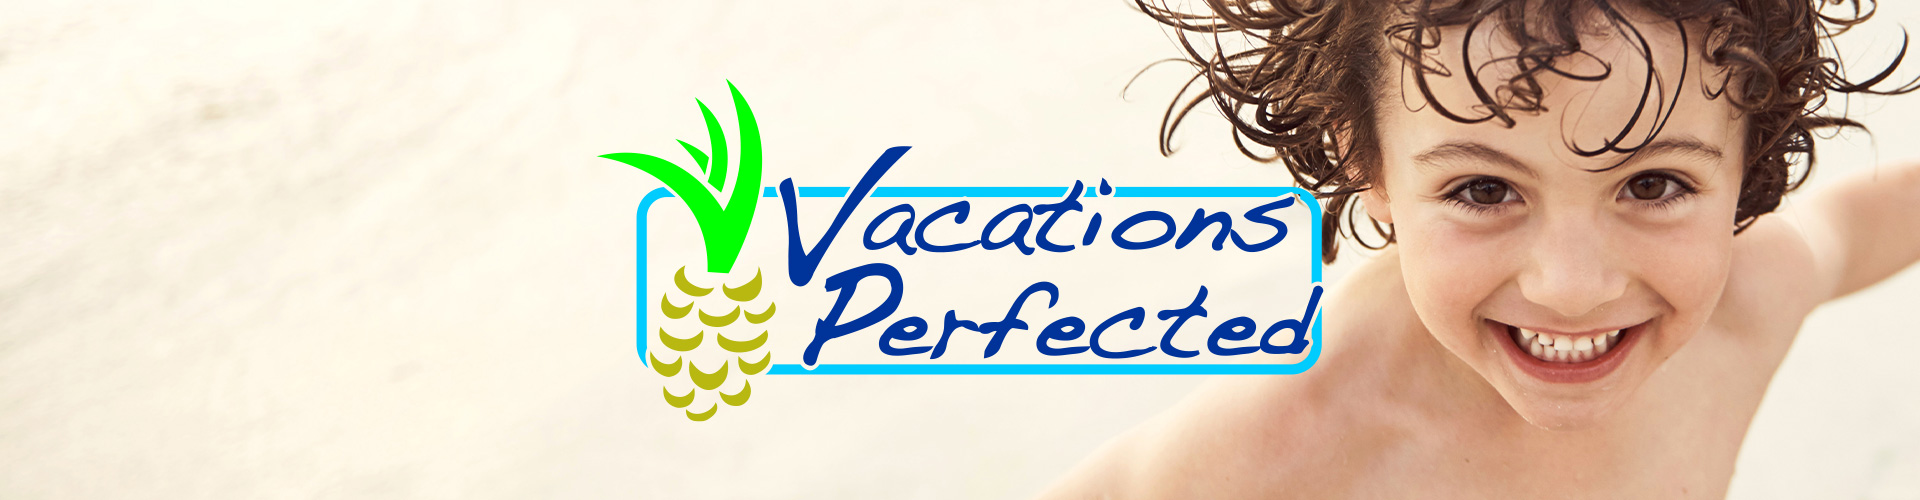 Vacations Perfected Banner